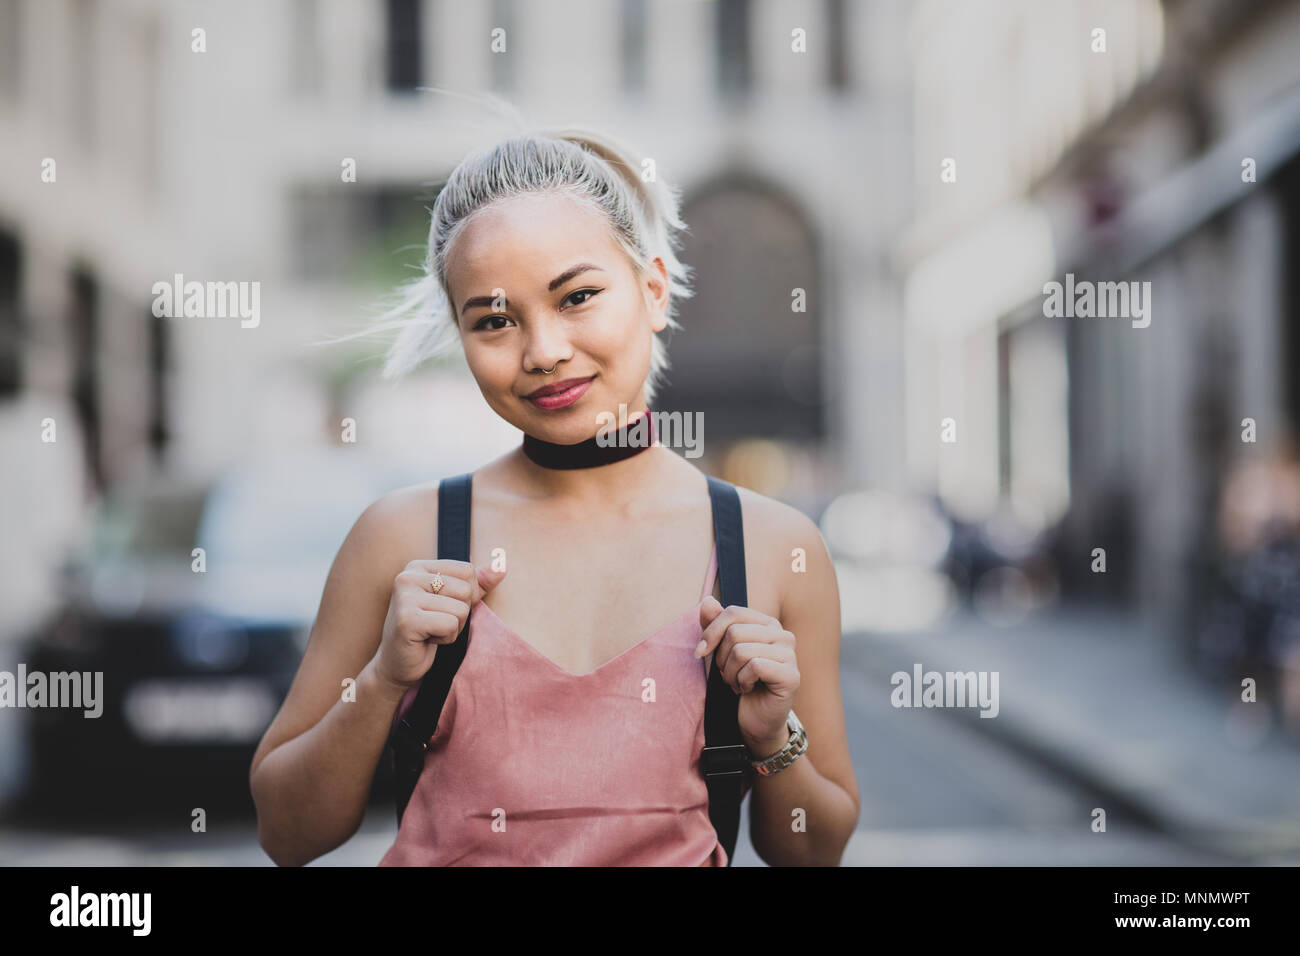 Portrait of young adult female looking to camera Stock Photo